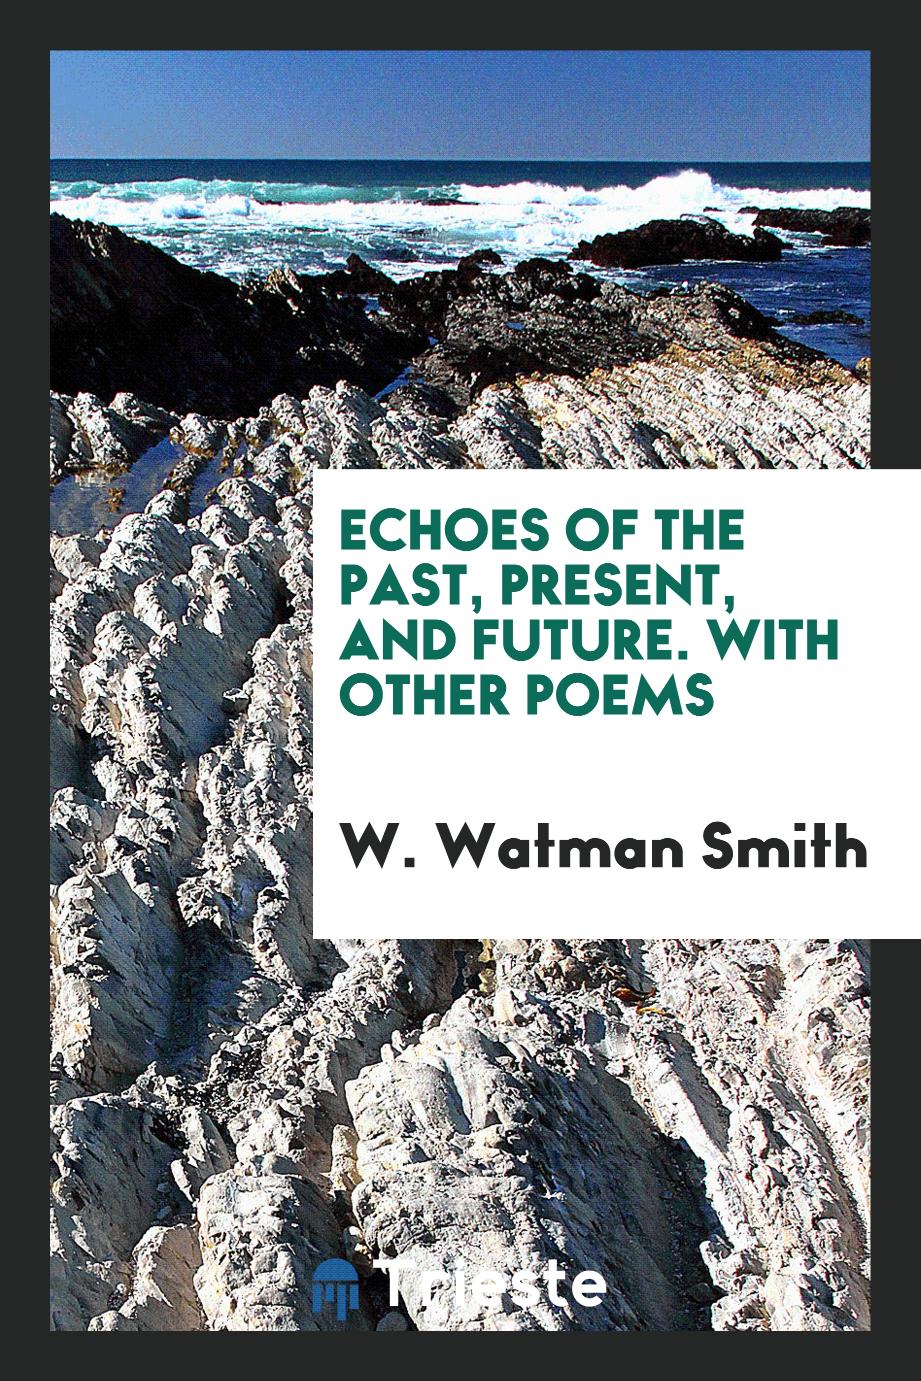 Echoes of the past, present, and future. With other poems